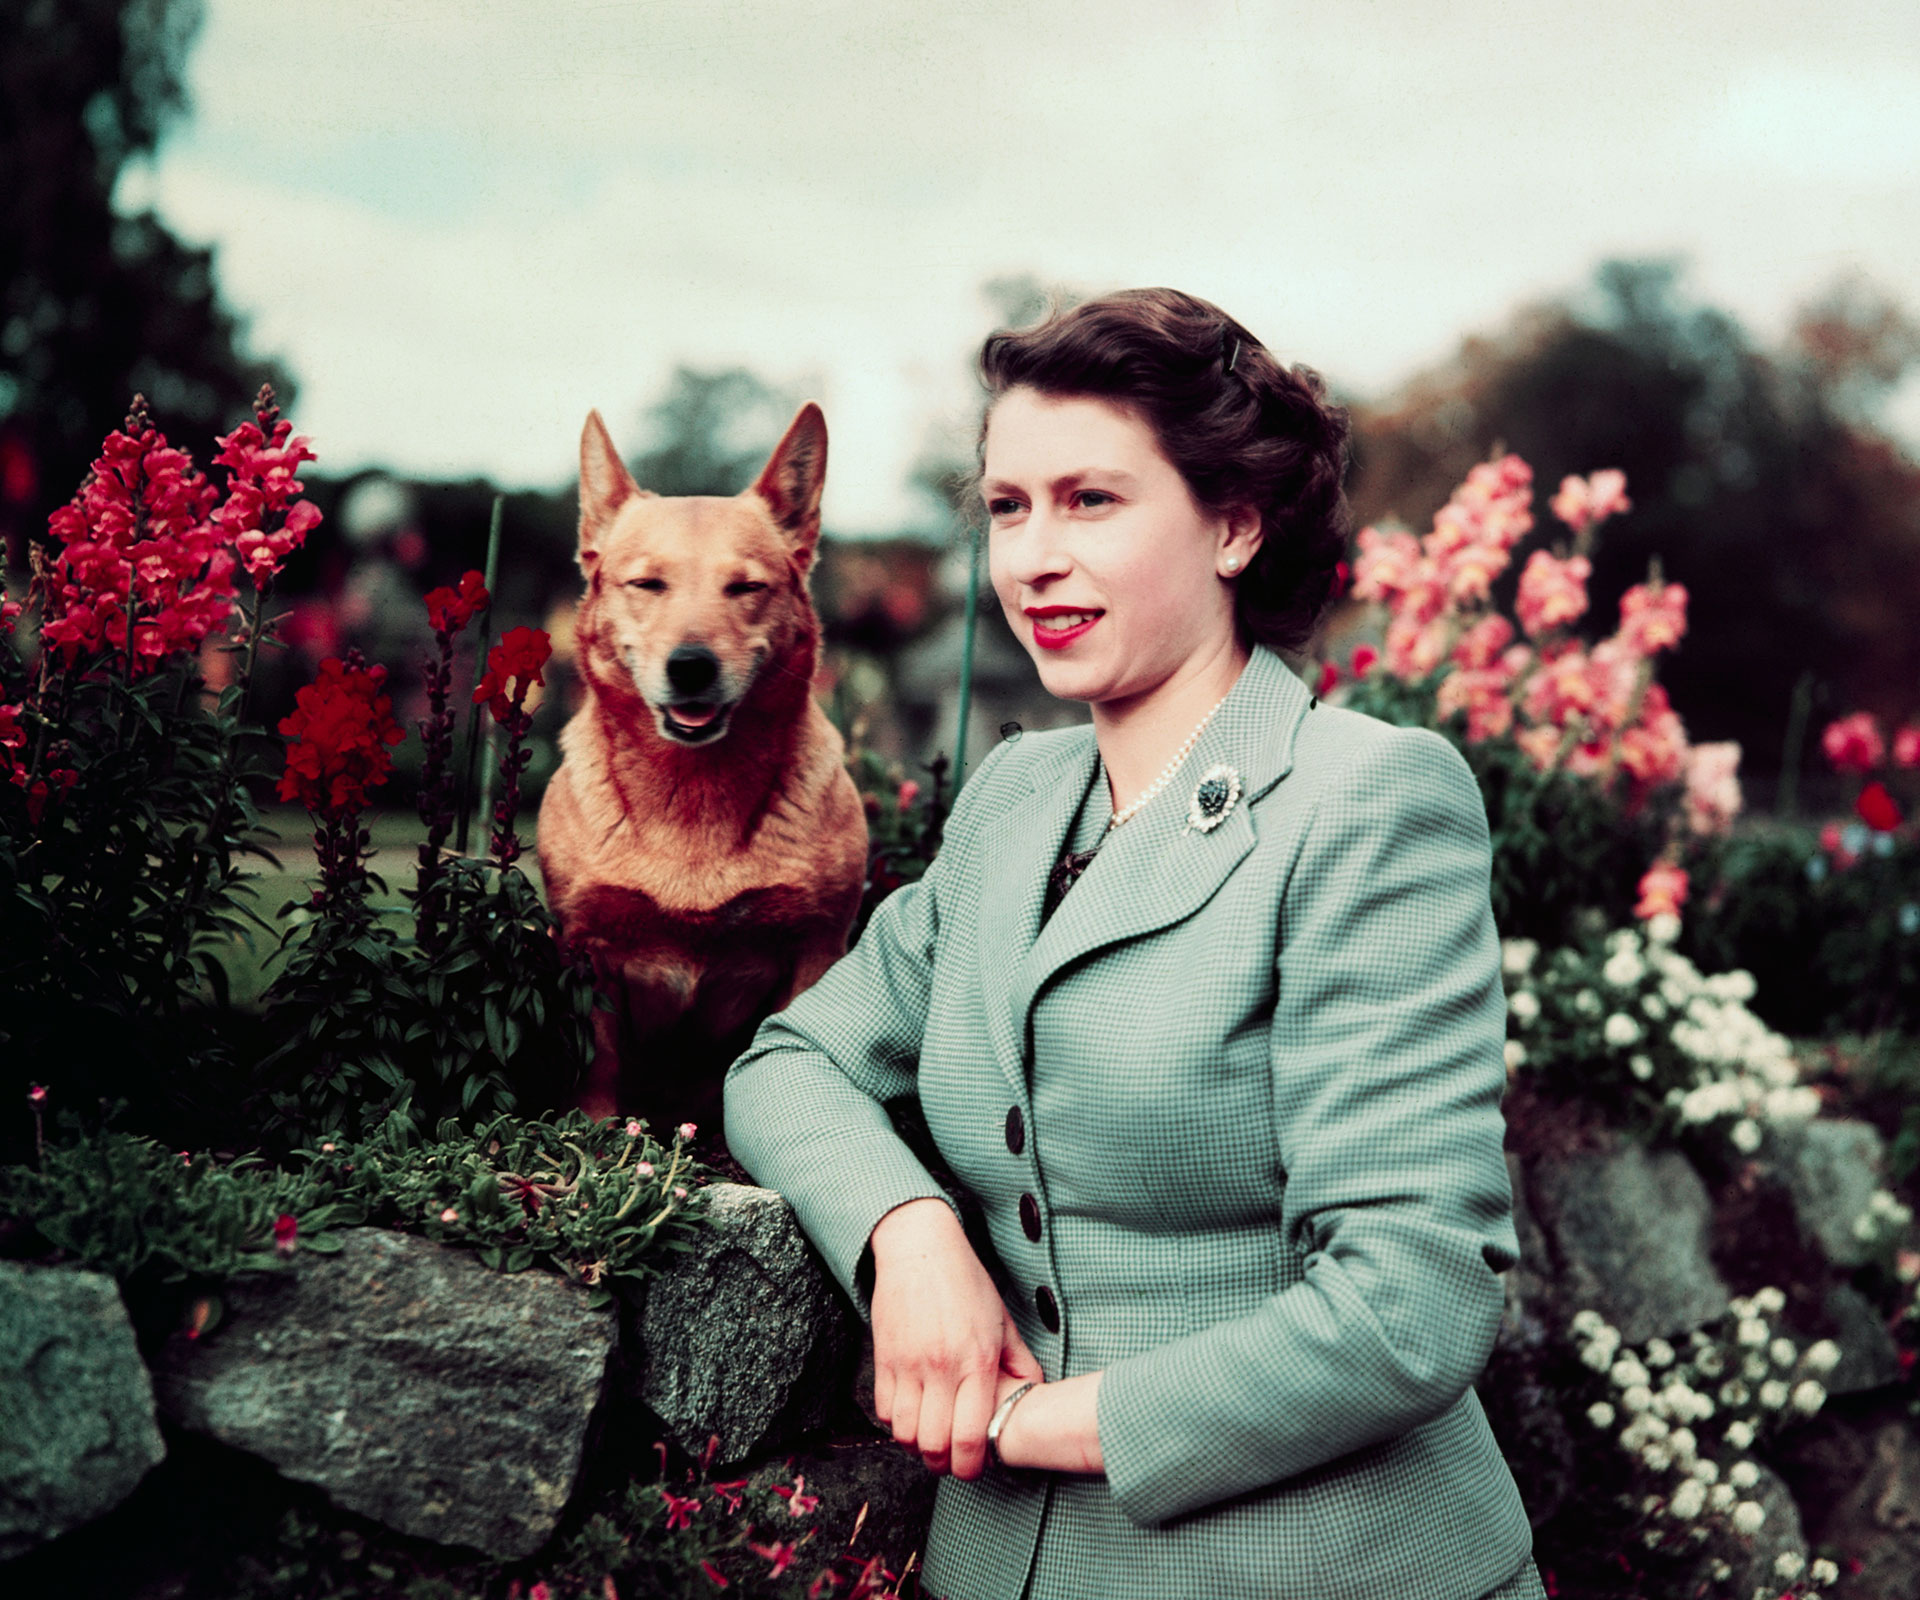 The Queen loses one of her beloved corgis